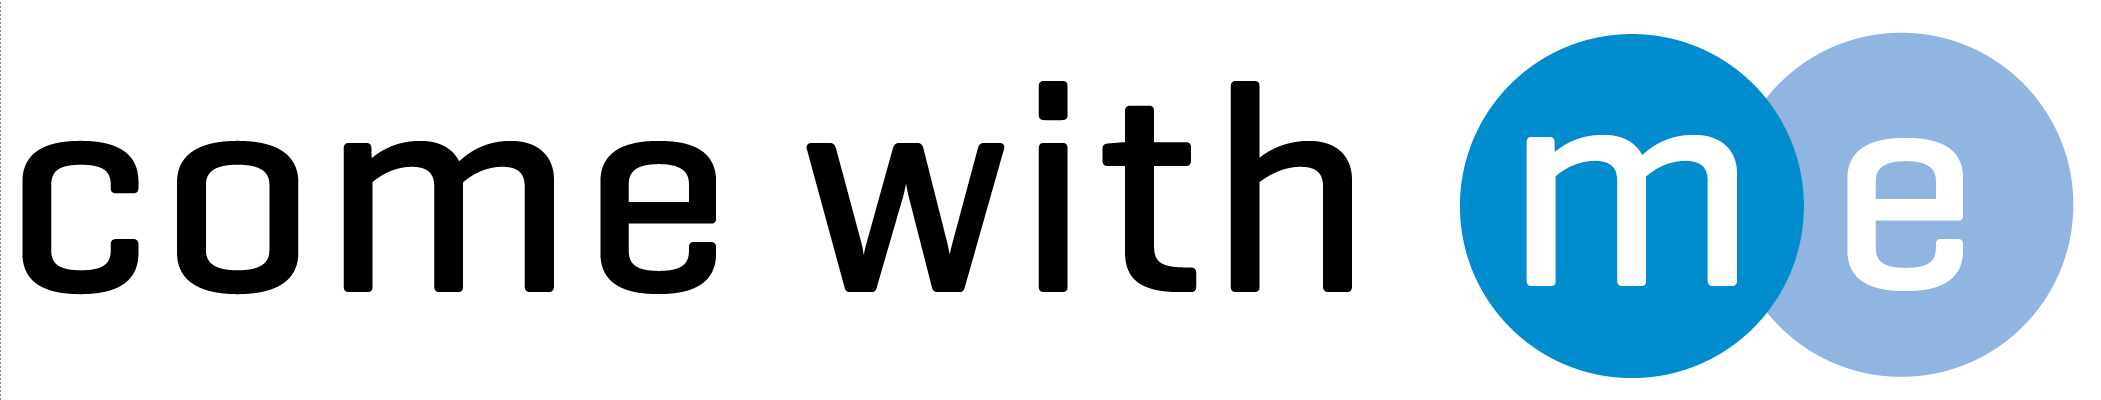 come with me logo